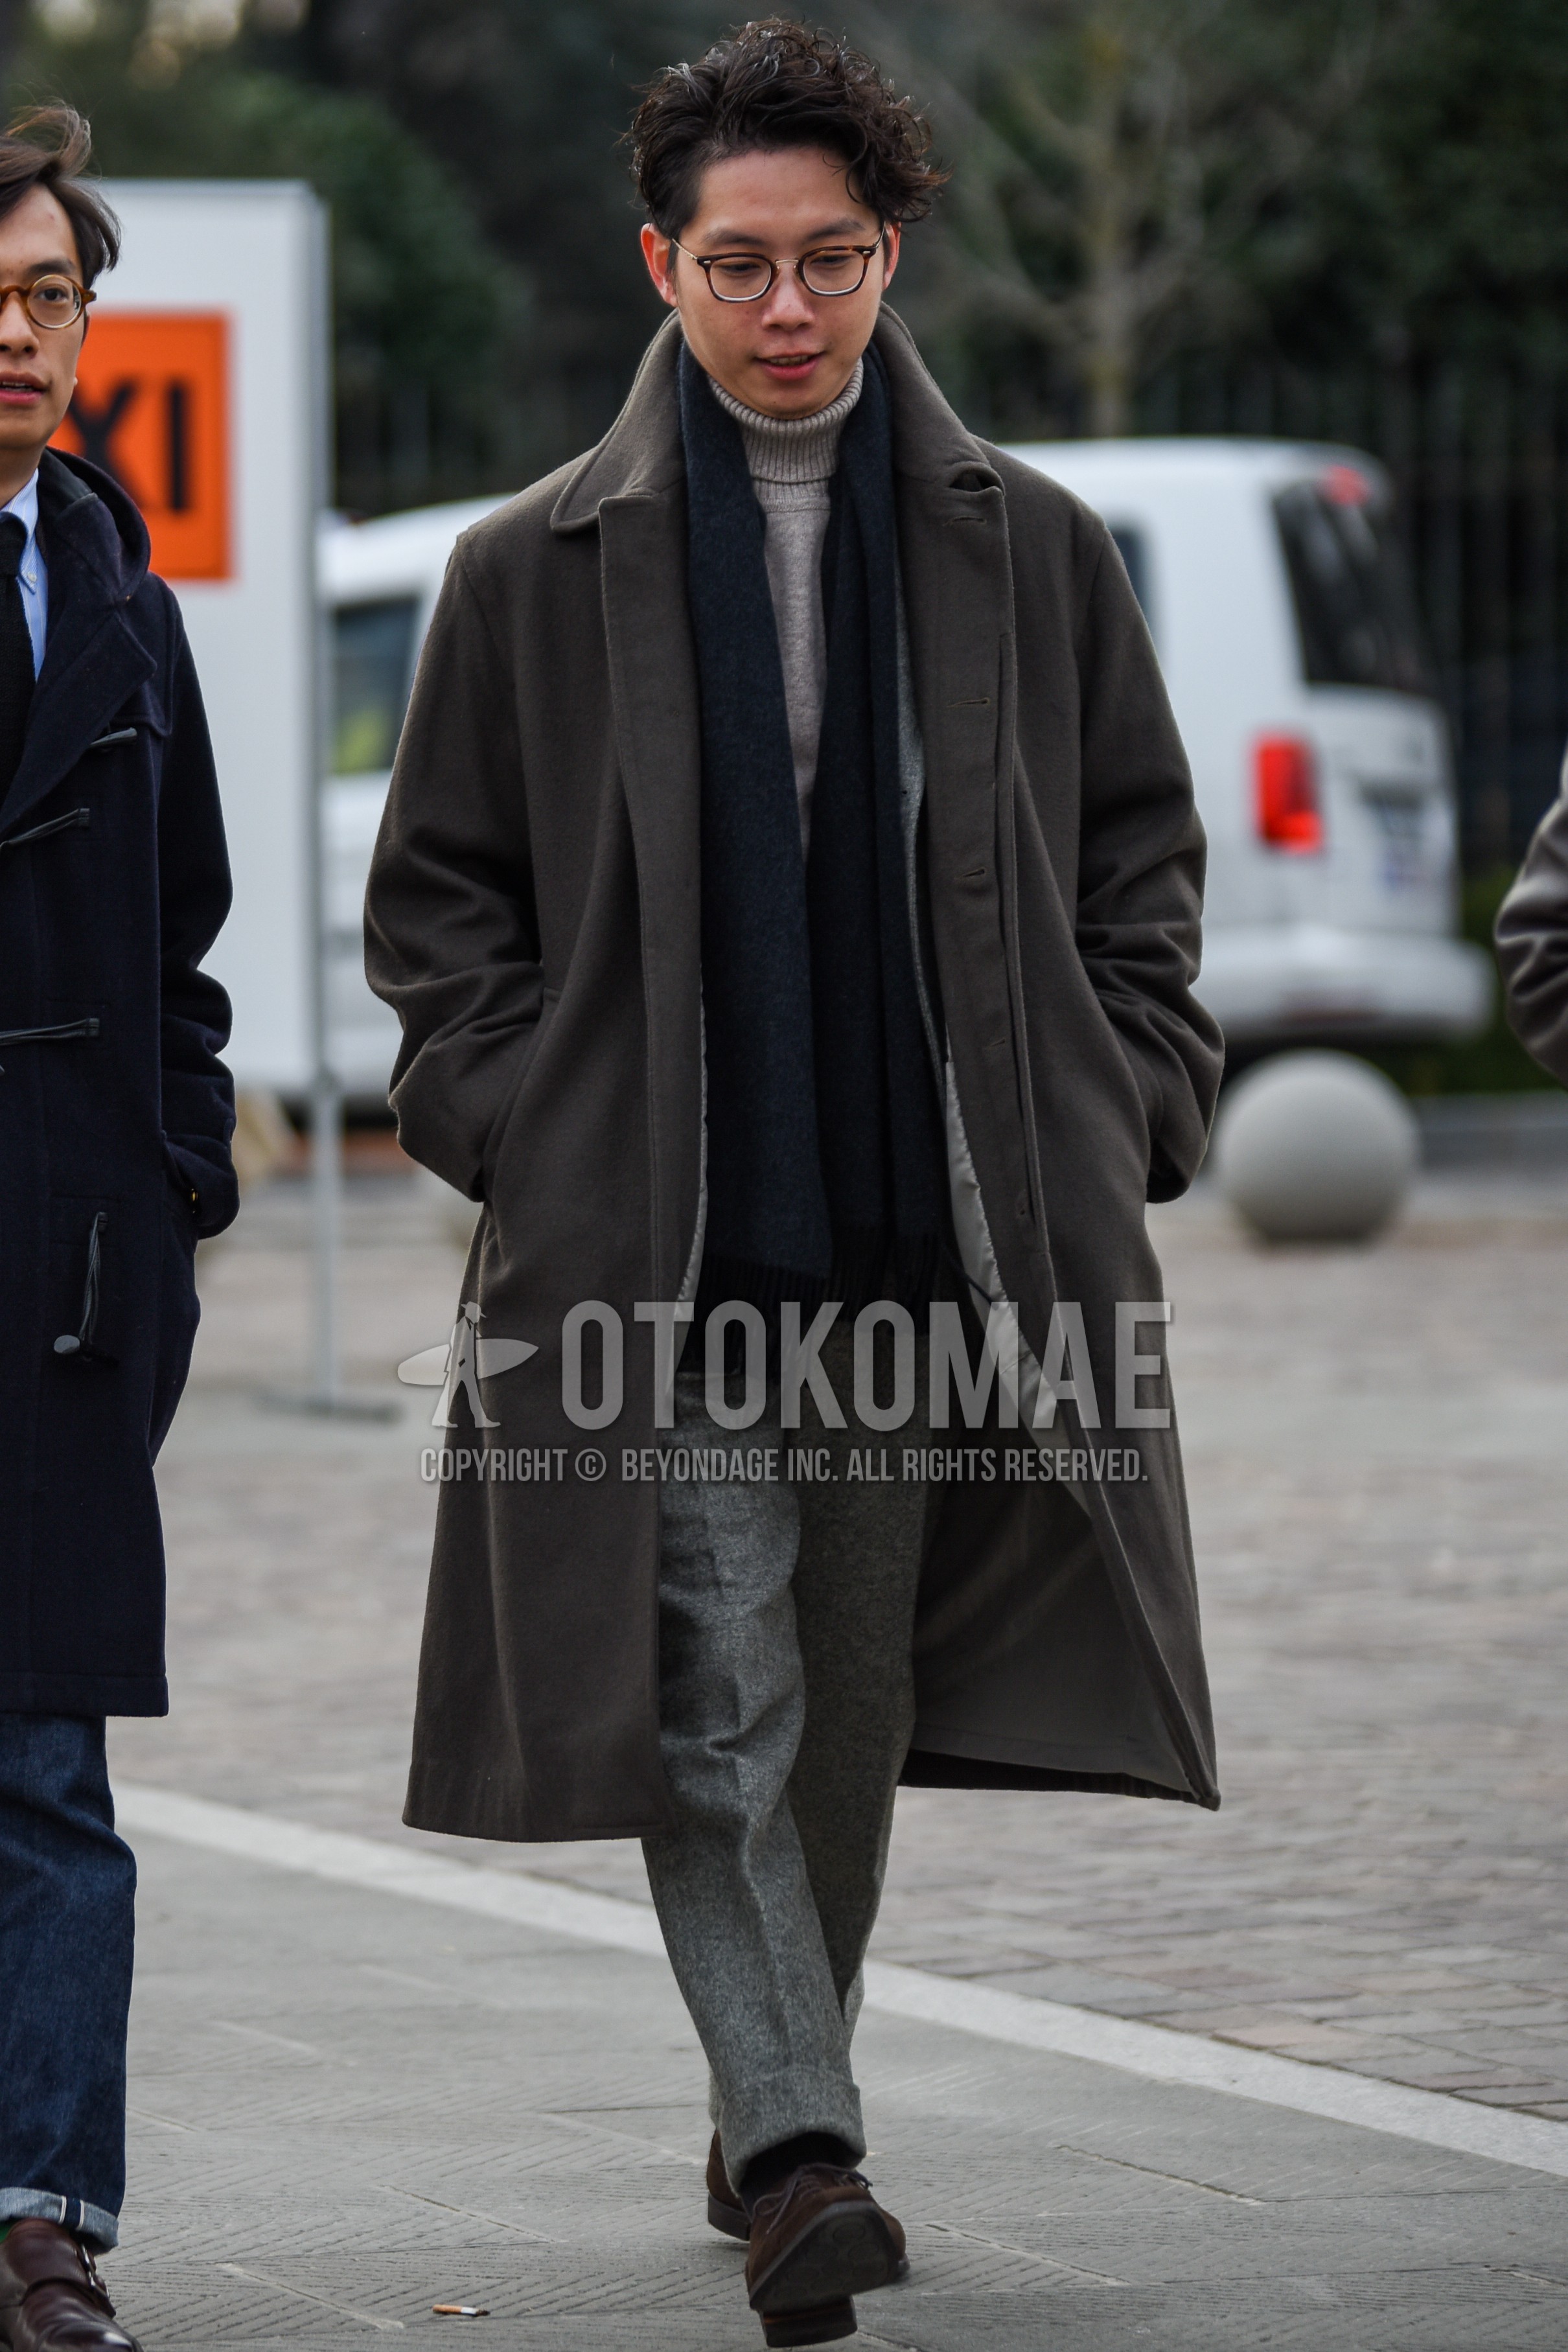 Men's autumn winter outfit with brown tortoiseshell glasses, black plain scarf, gray plain stenkarrer coat, gray plain turtleneck knit, gray plain slacks, brown straight-tip shoes leather shoes.